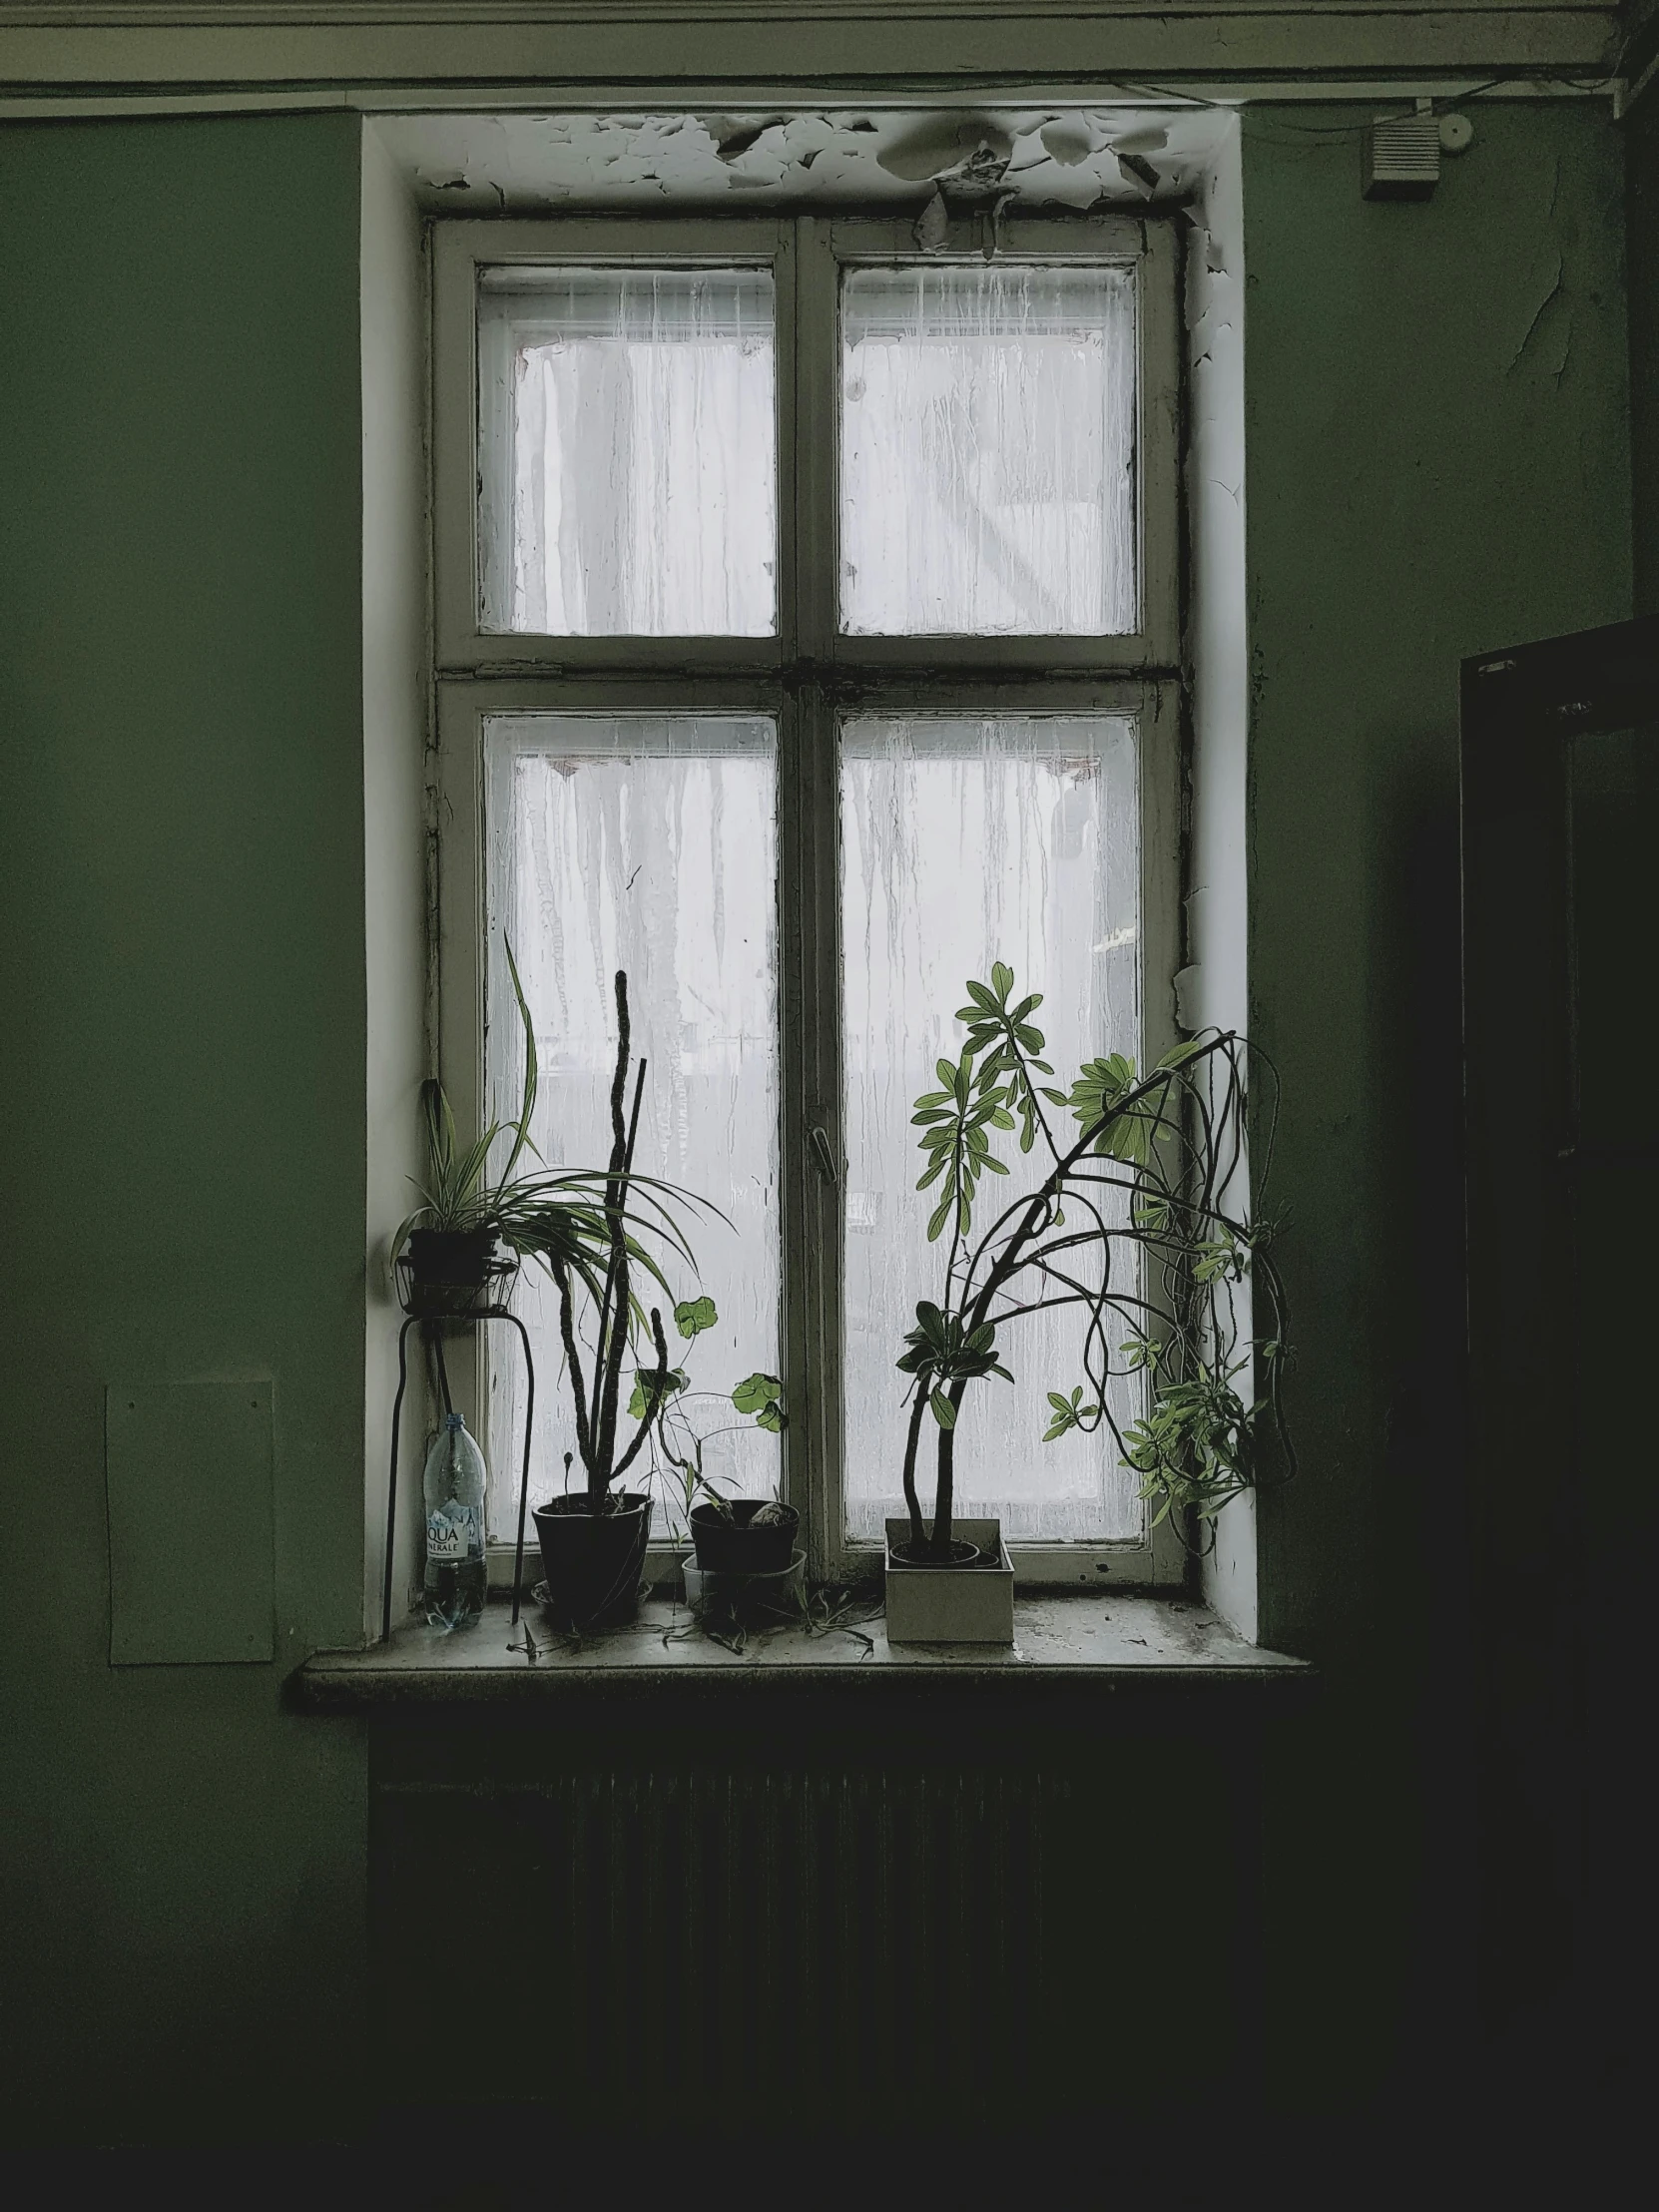 potted plants sit on a window sill in an old building